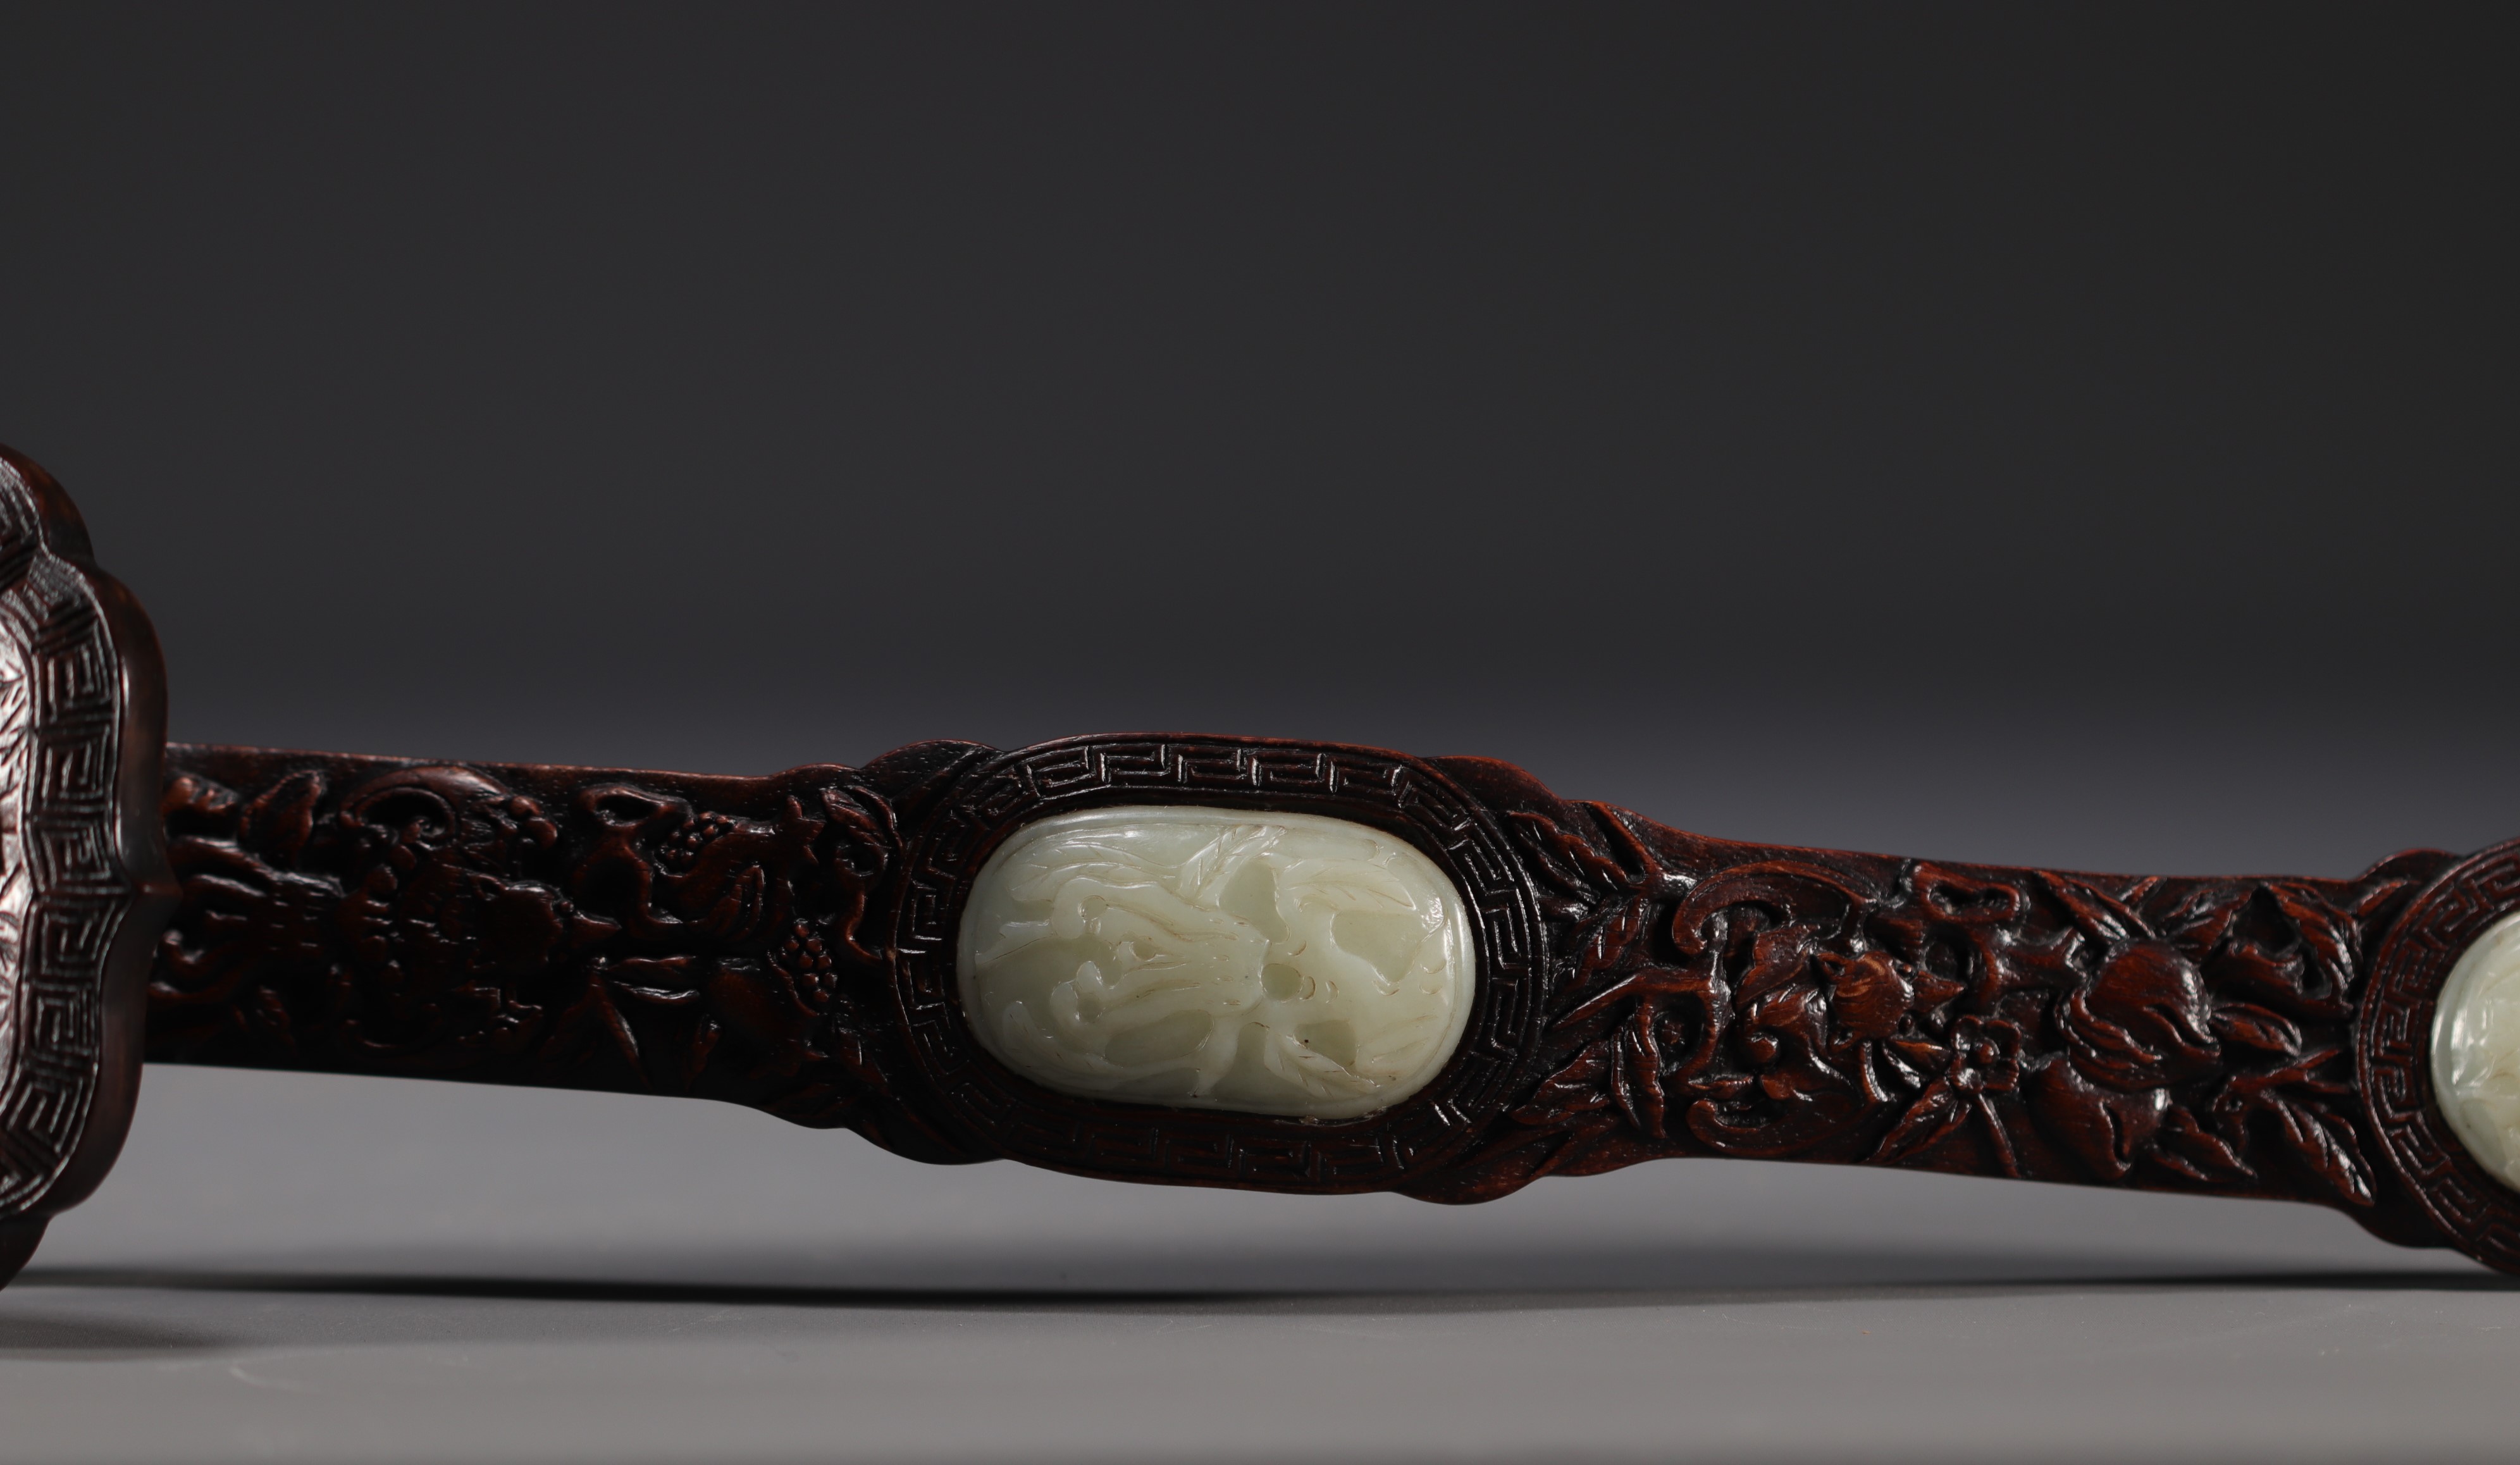 China - Large Ruyi scepter in carved Zitan wood and celadon jade, decorated with bats and peaches. - Image 5 of 5